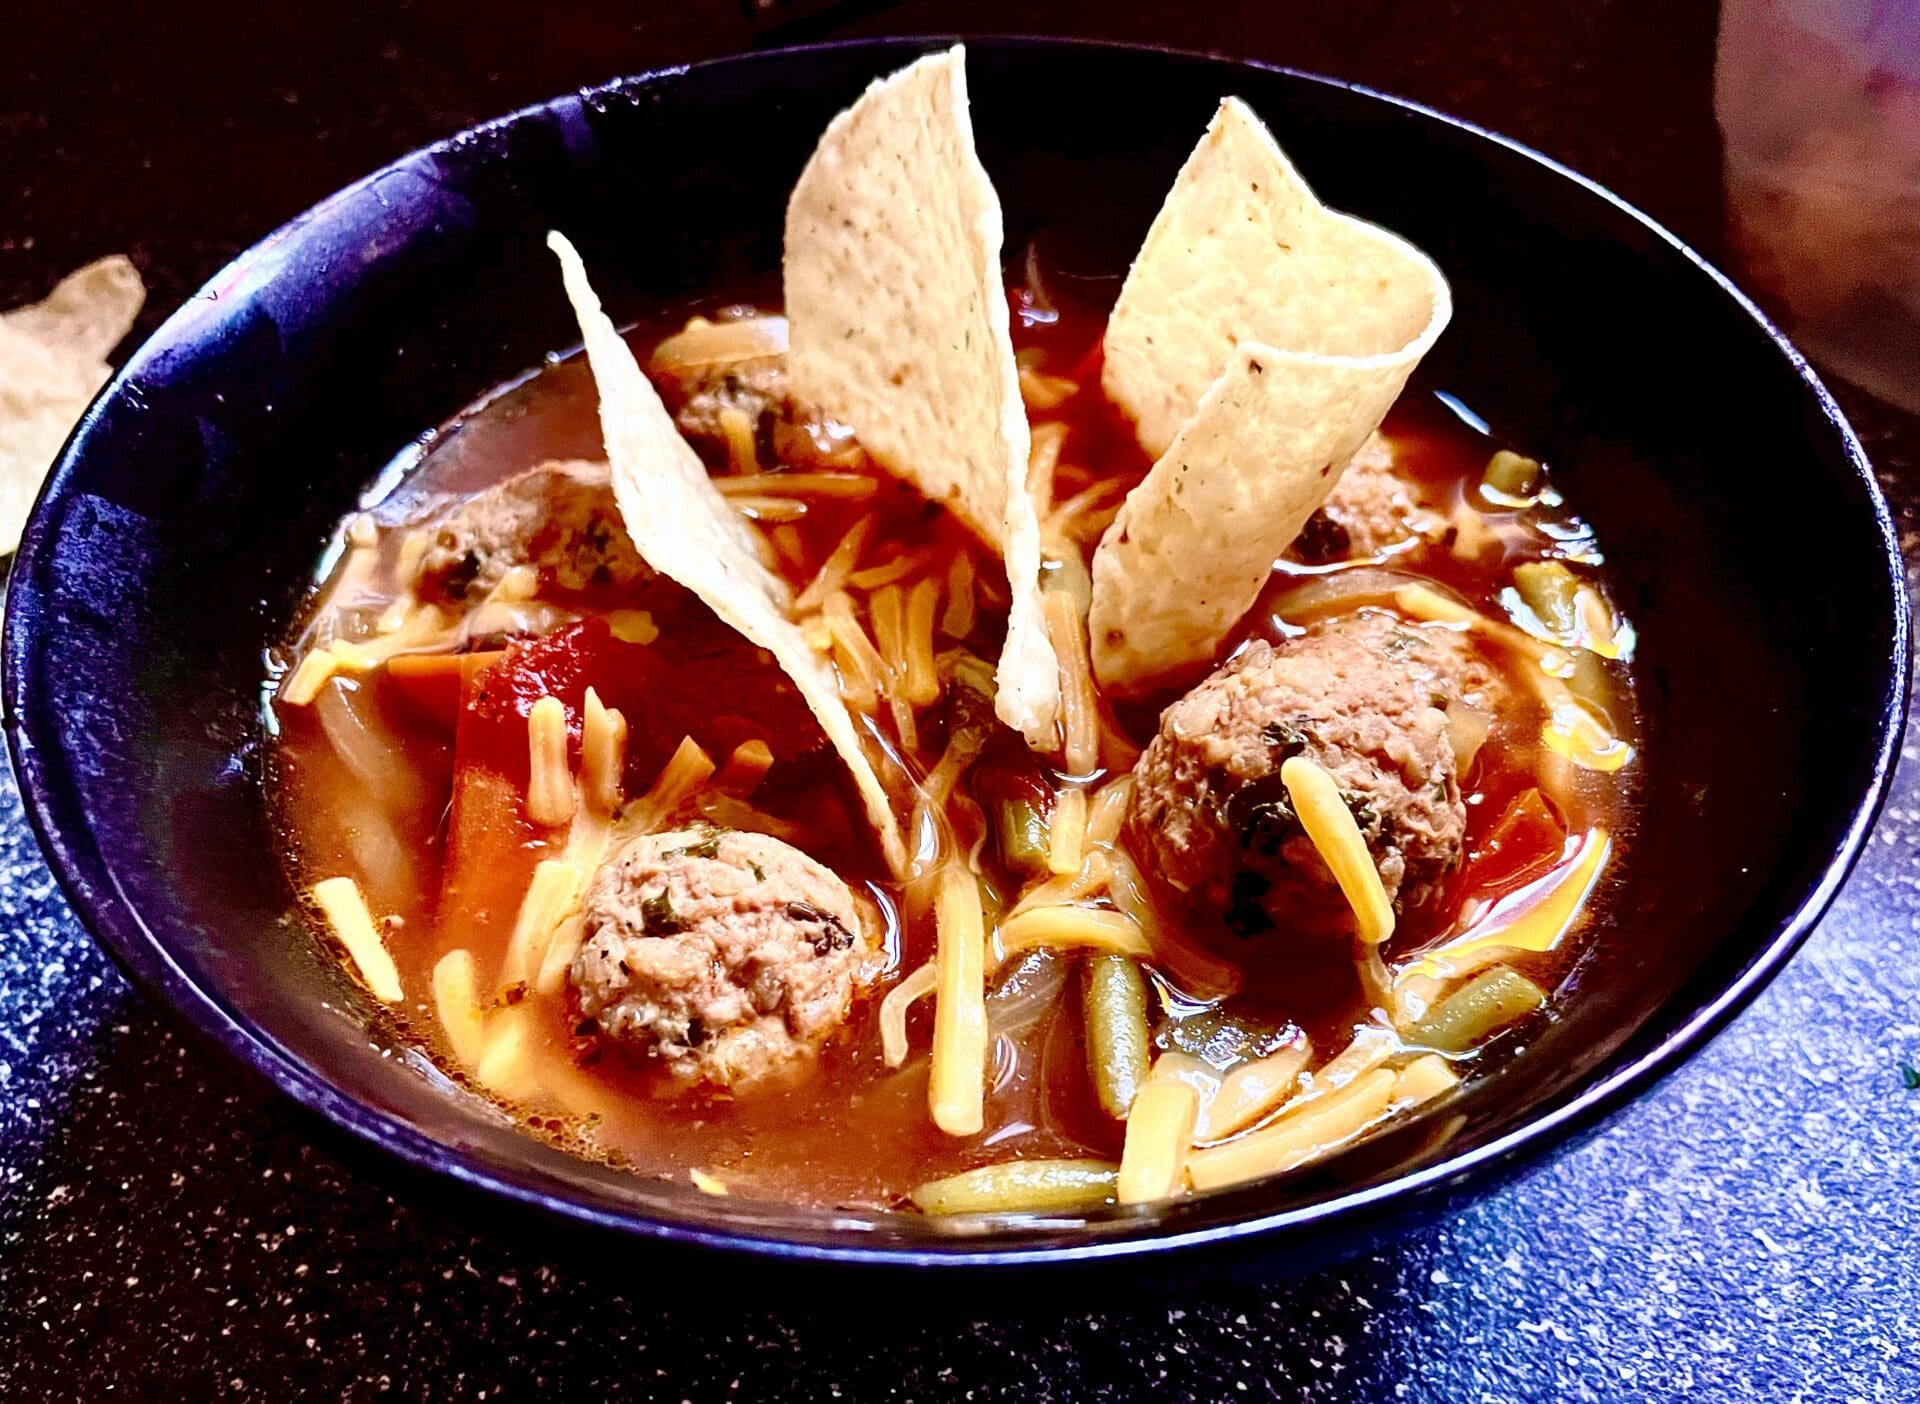 A bowl of soup with meatballs and tortillas.